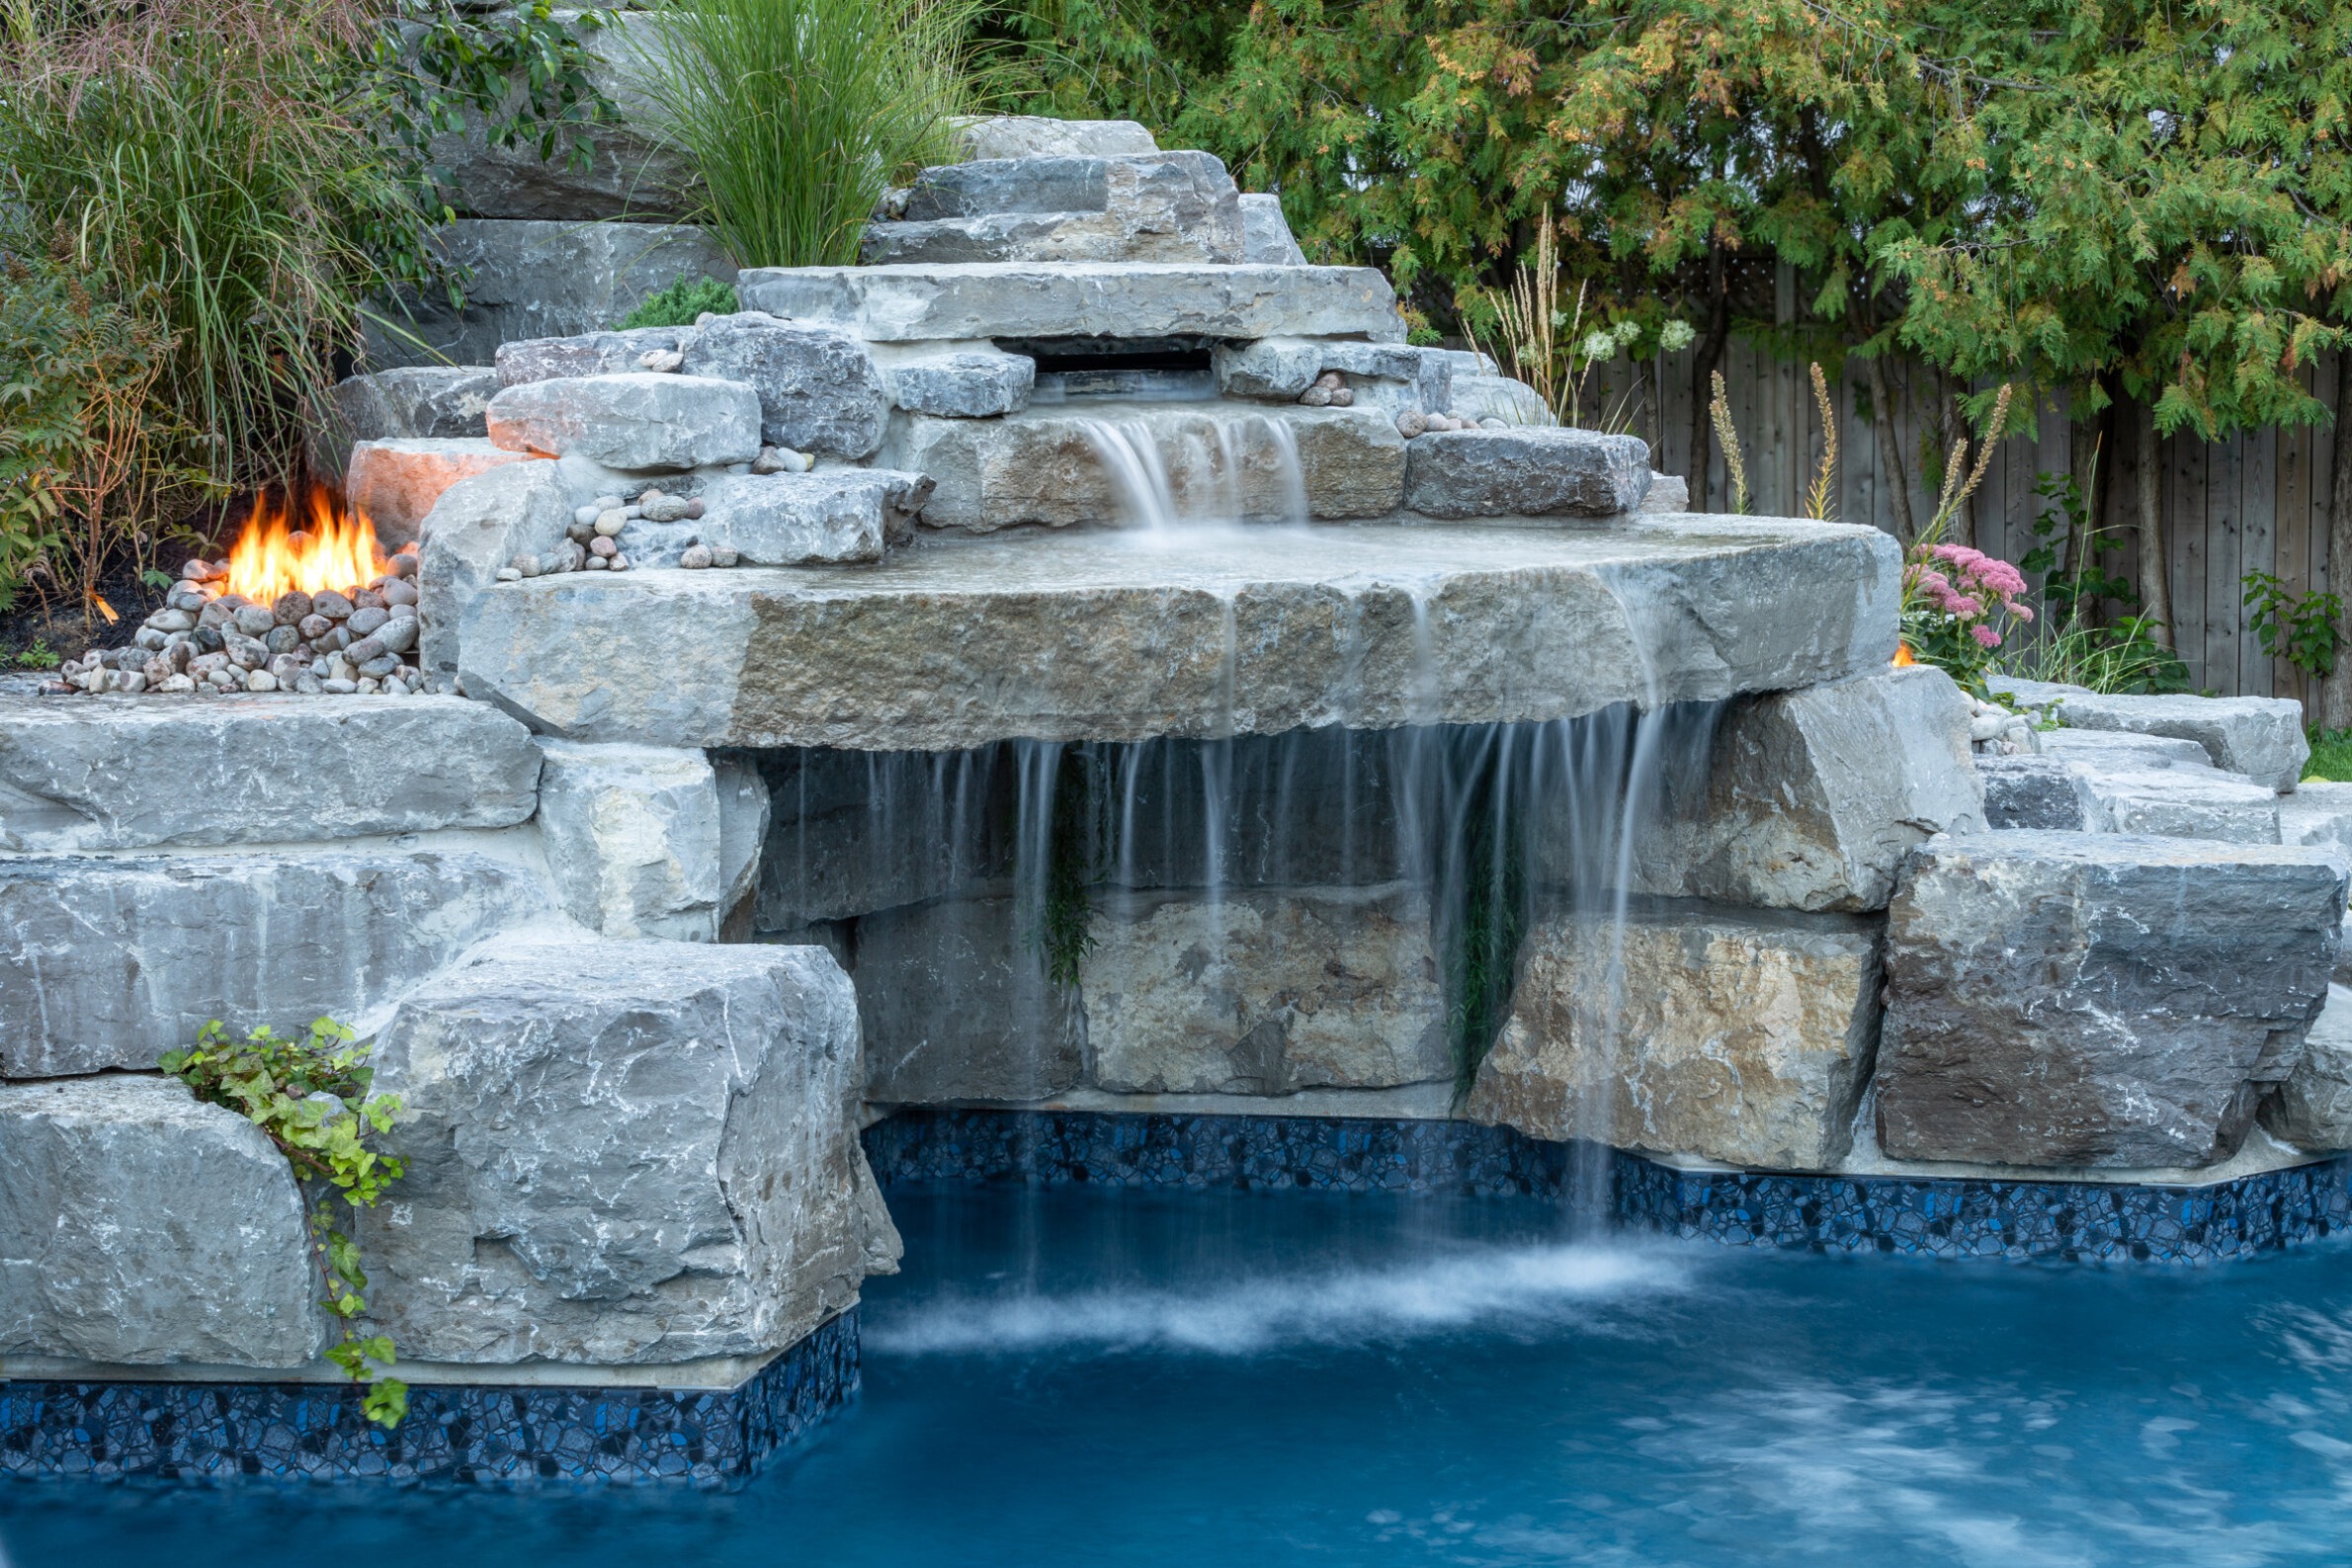 An artificial cascading waterfall built with layered stone flows into a pool with clear blue water. A fire pit emits flames near greenery and a fence.